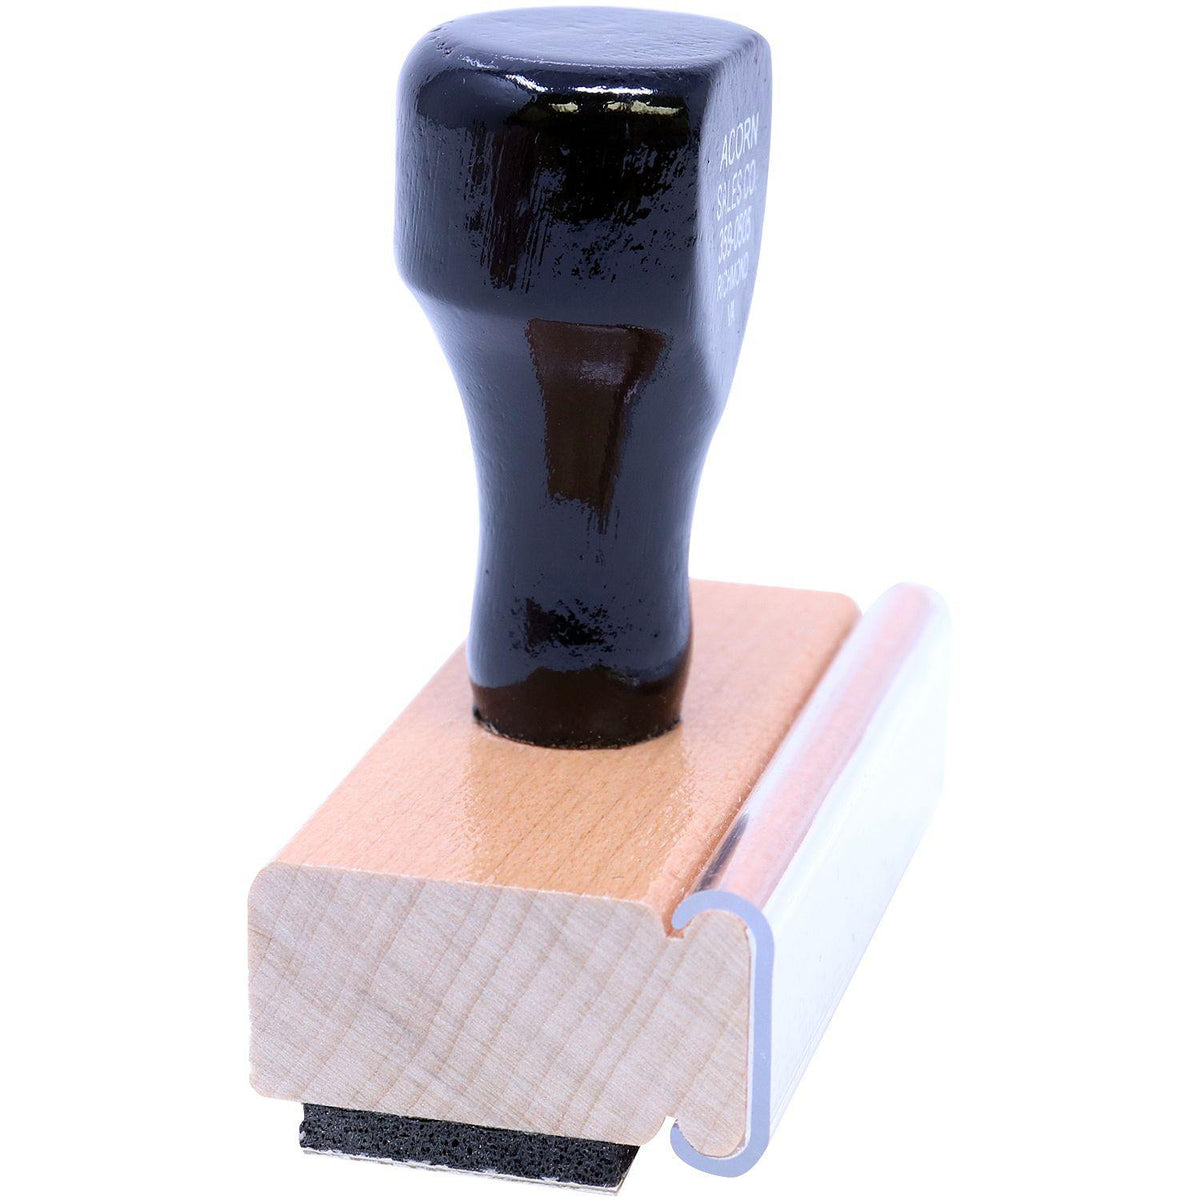 Side View of Storage Rubber Stamp at an Angle